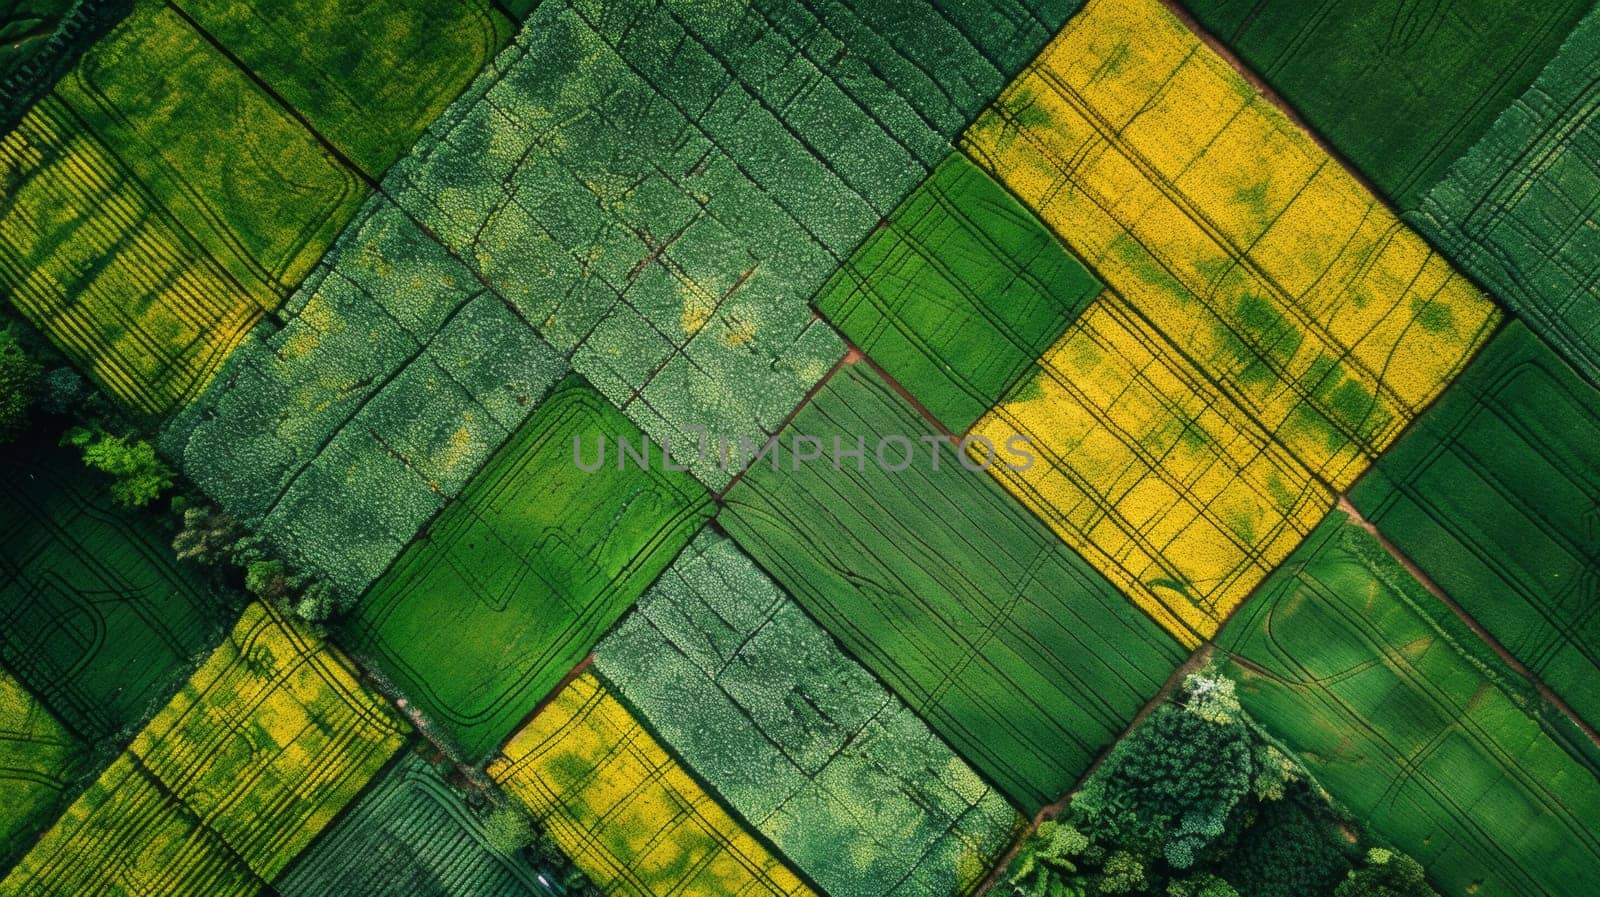 A view of a large field with many different colors and shapes